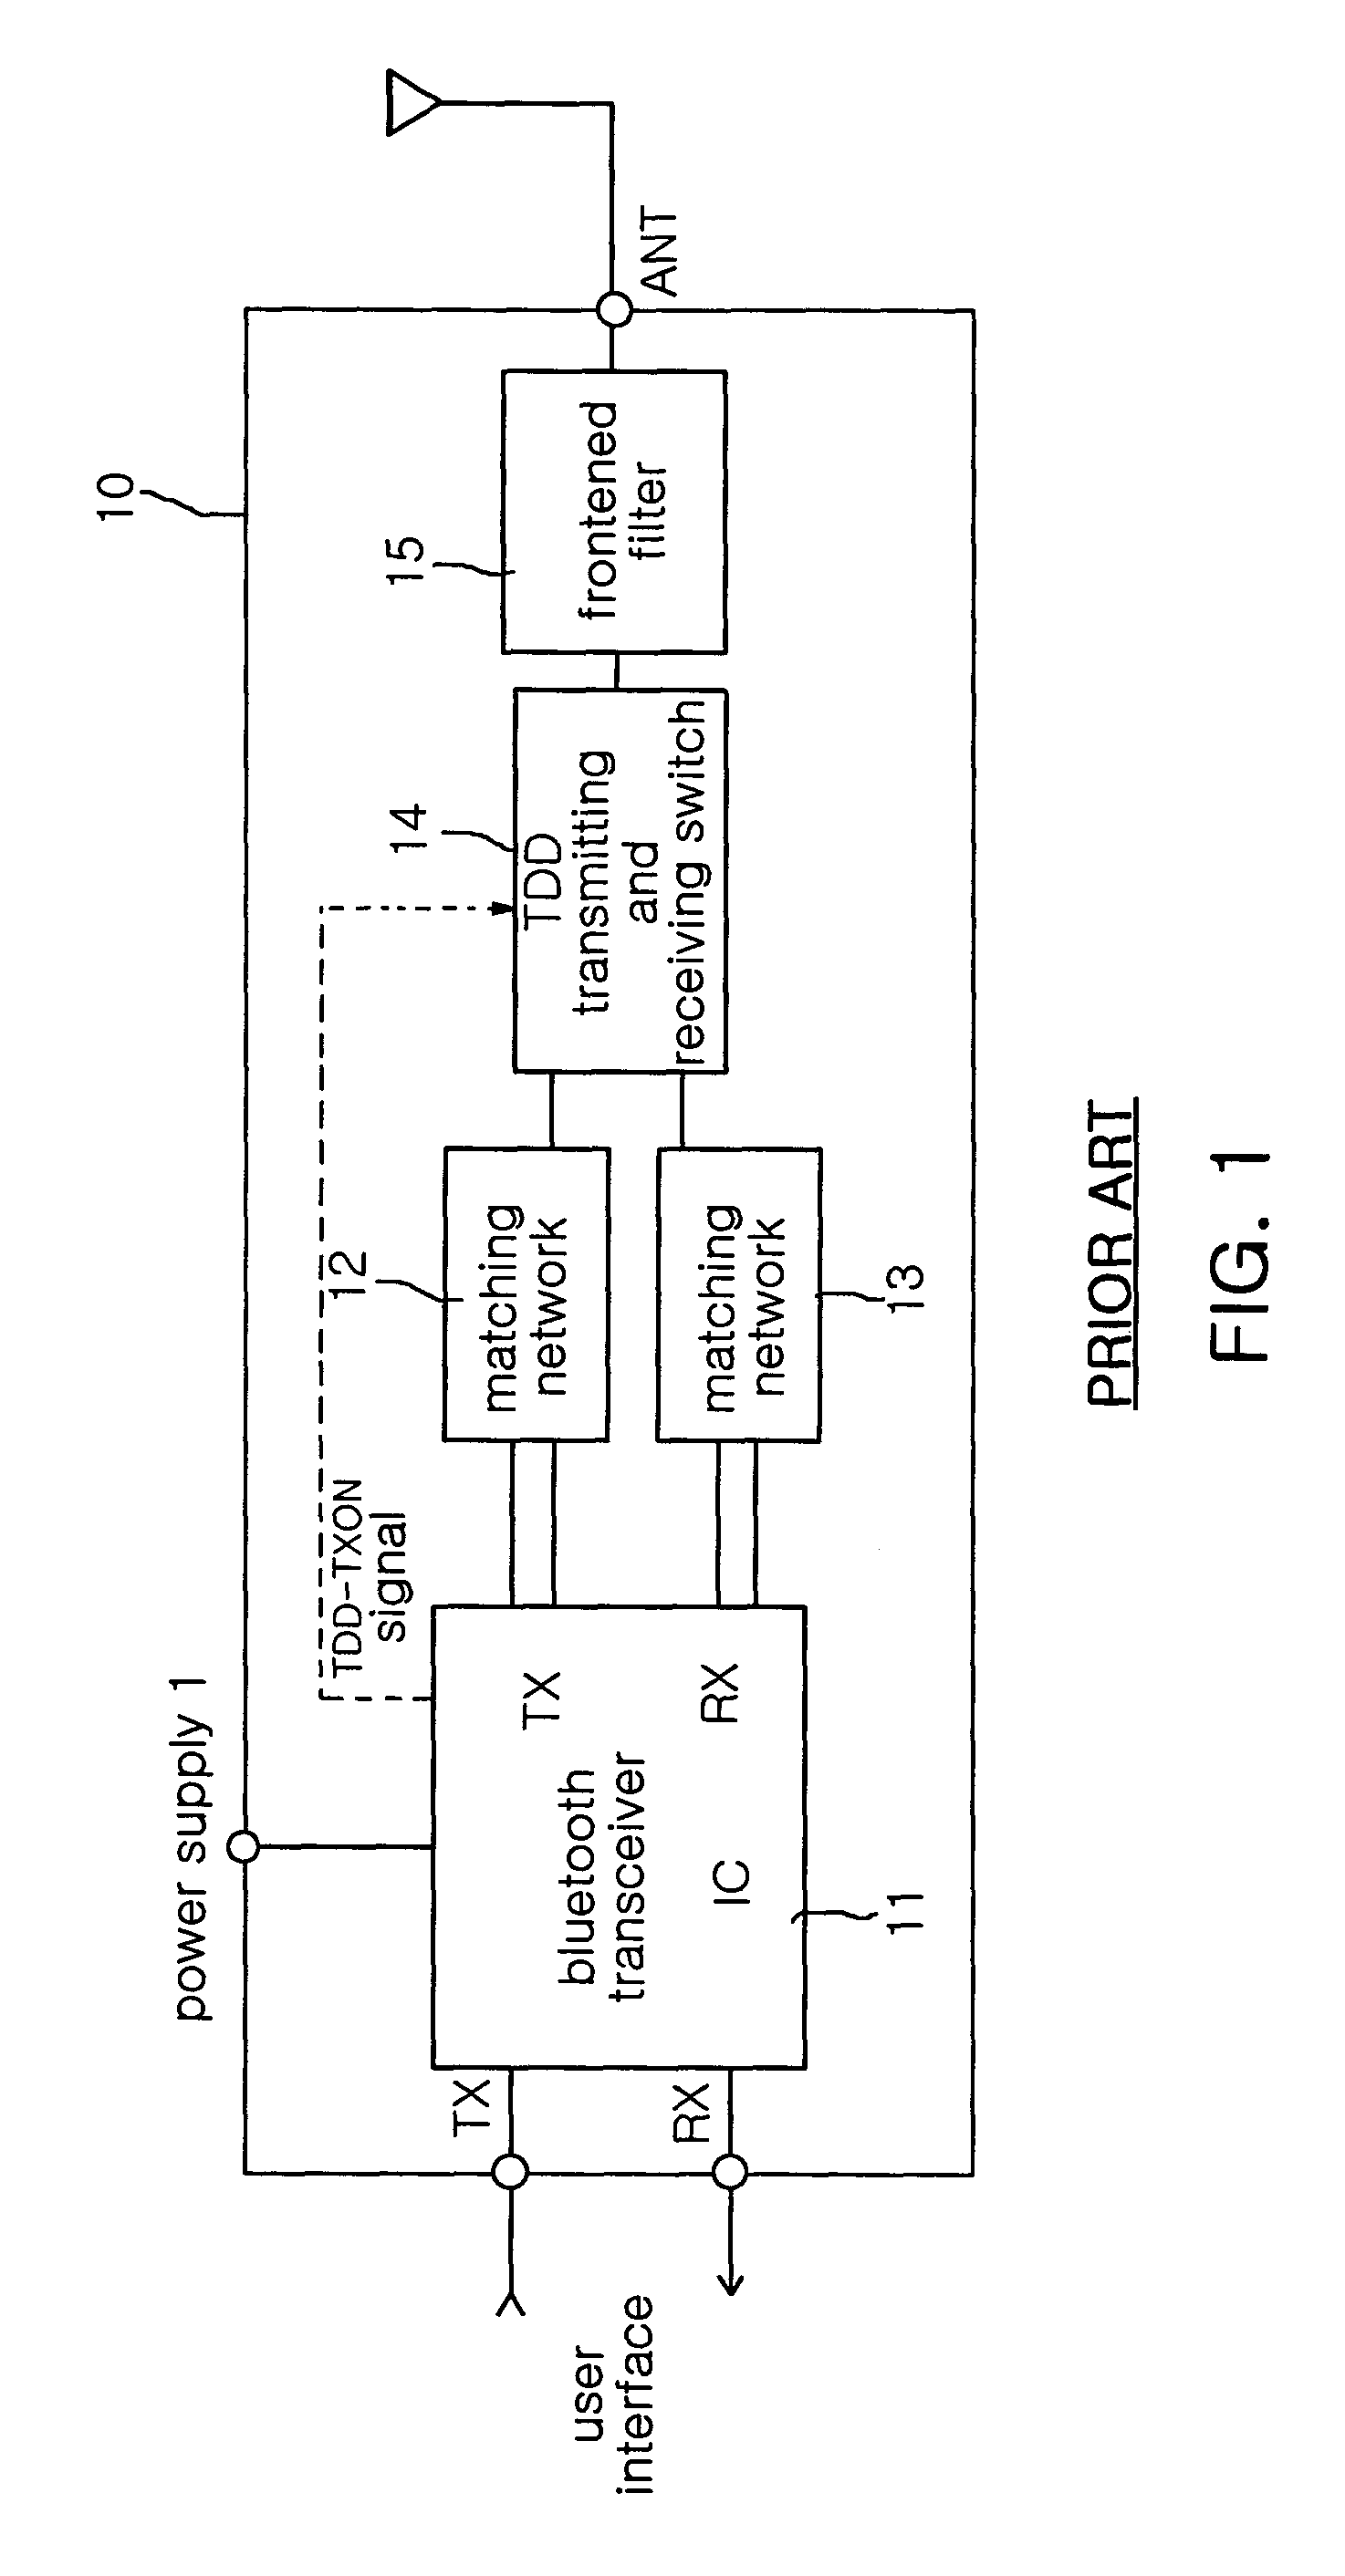 Time-division-duplexing type power amplification module